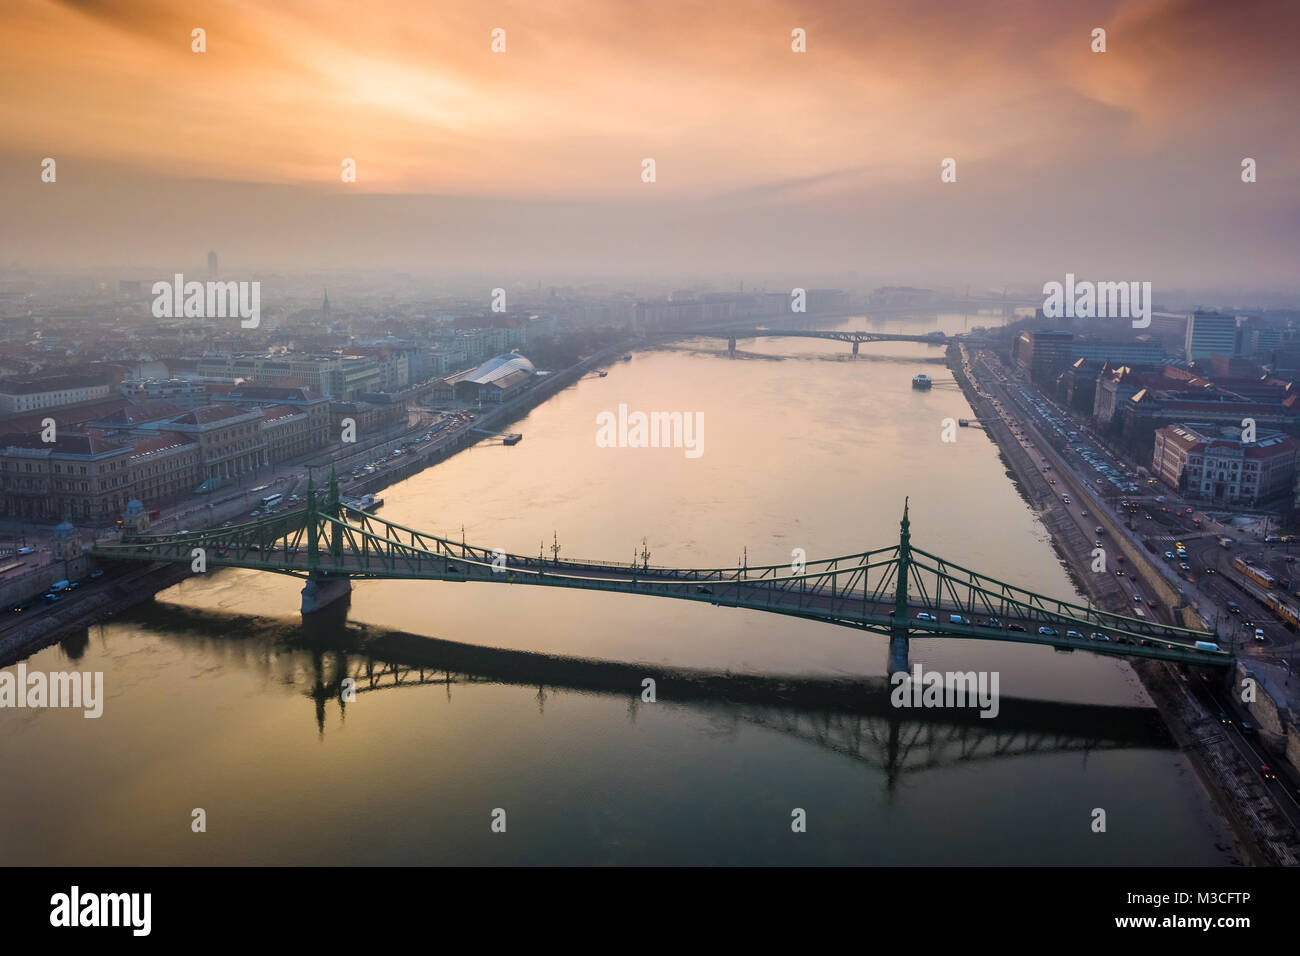 Budapest, Hungary - Aerial view of Liberty Bridge over River Danube at sunrise Stock Photo